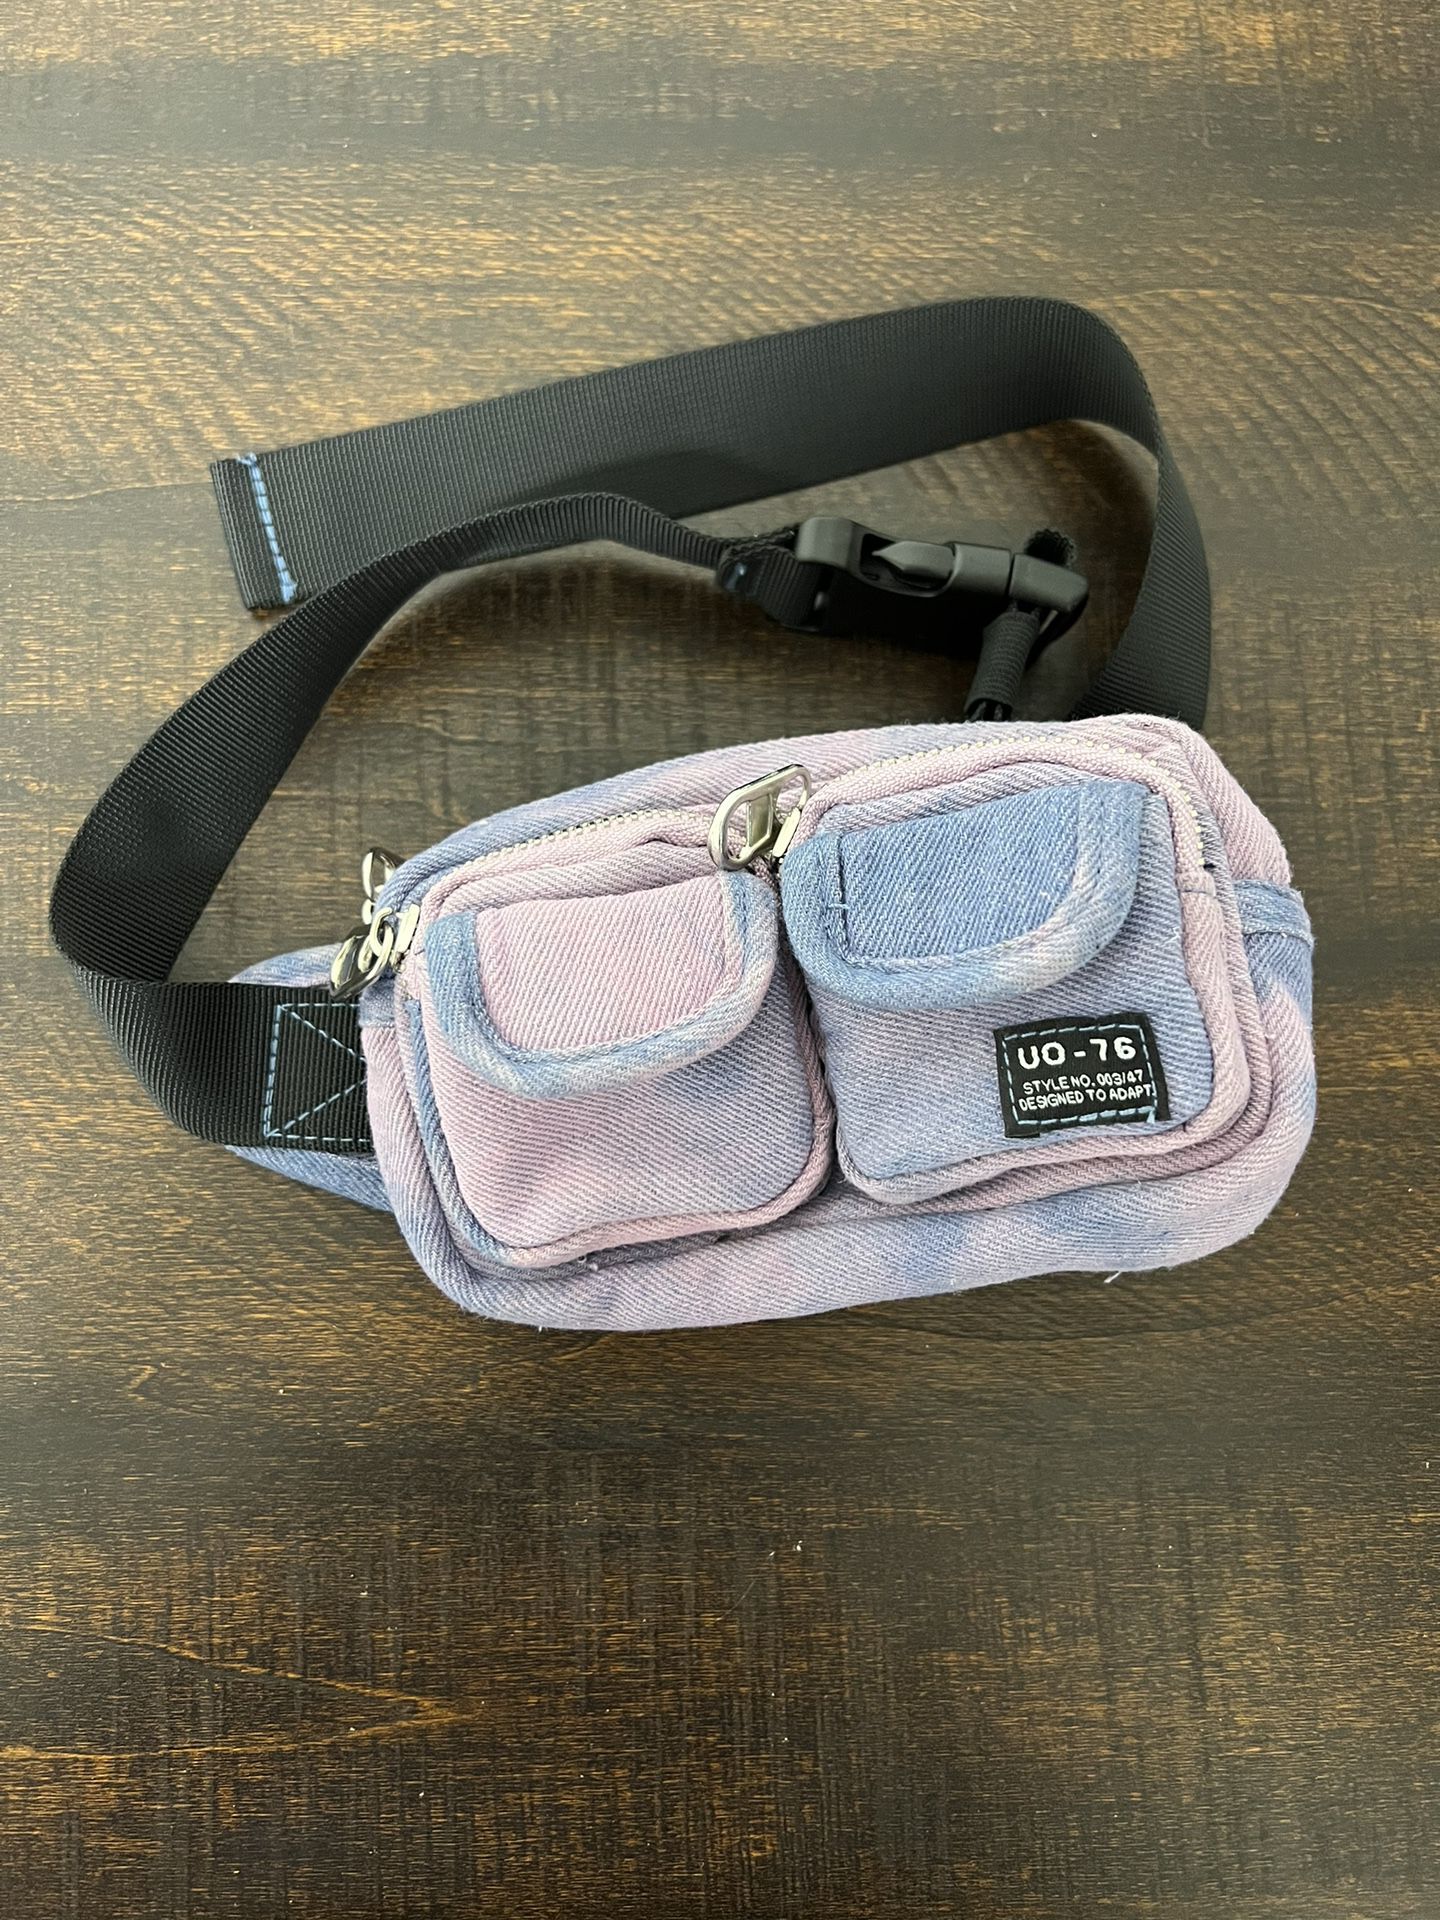 Urban Outfitters Worn-Out Style Waist Bag/Belt Bag